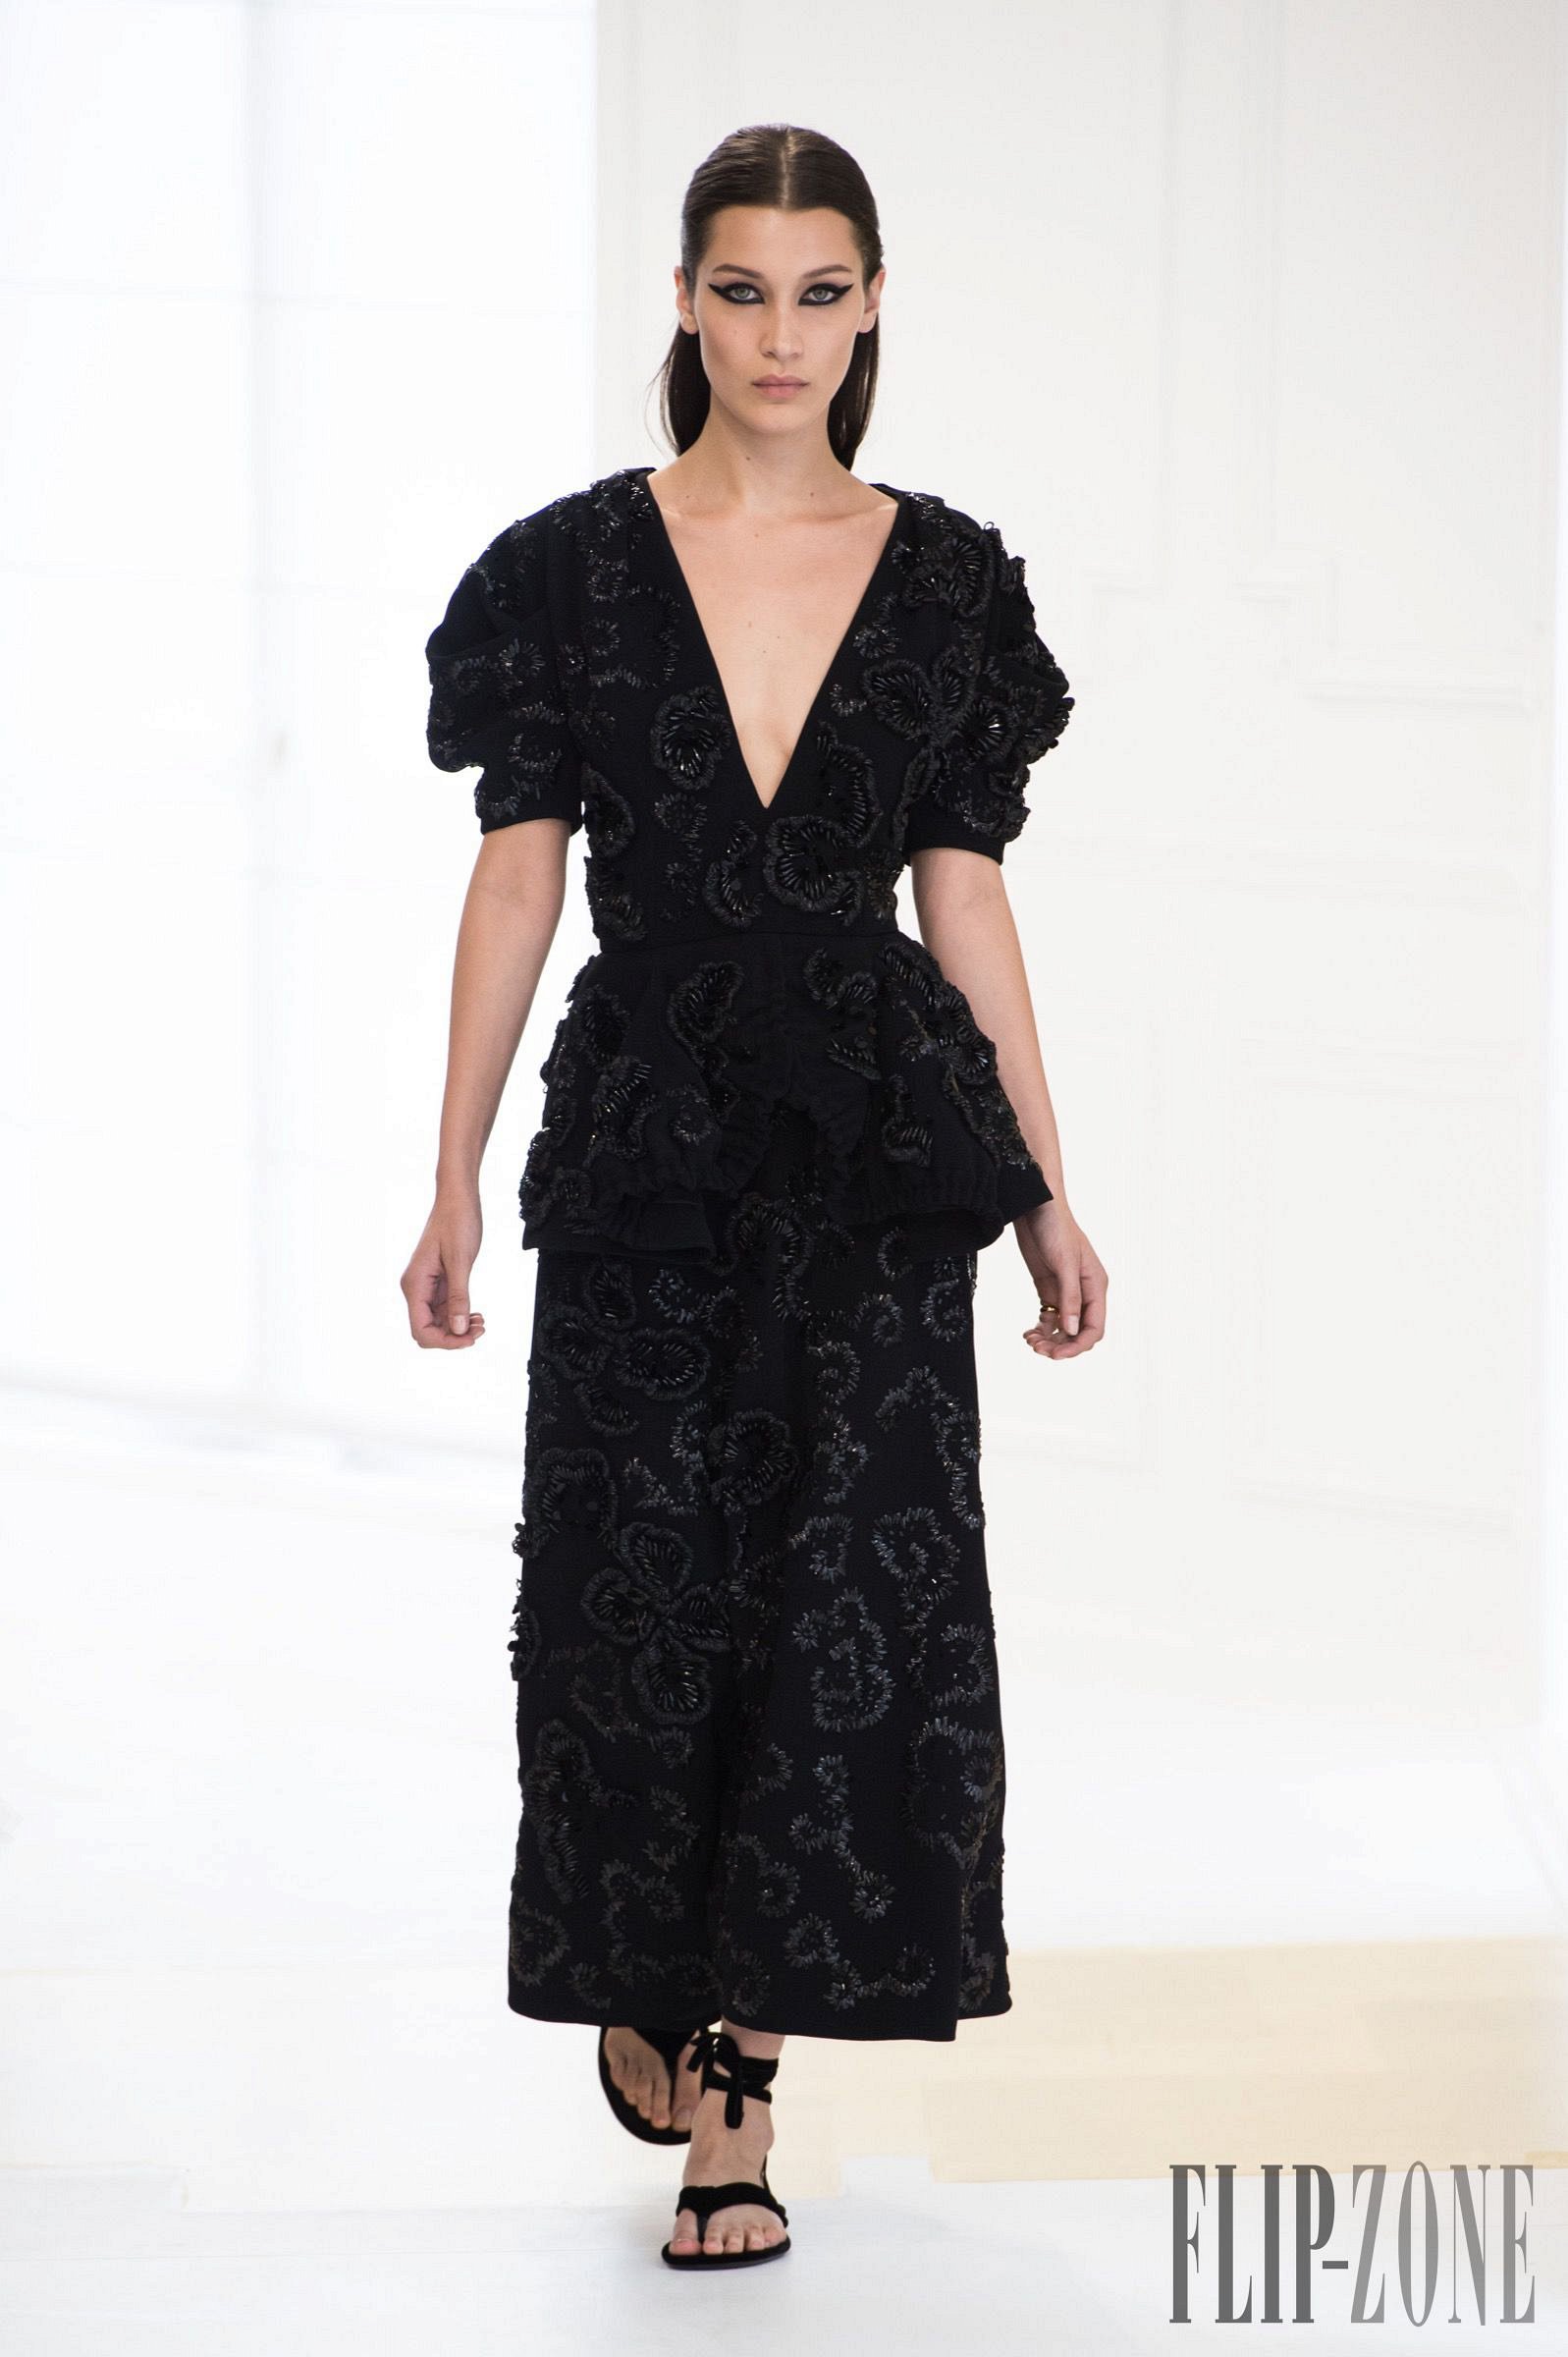 Evenings in Black Couture - A selection of 18 gowns from Haute Couture